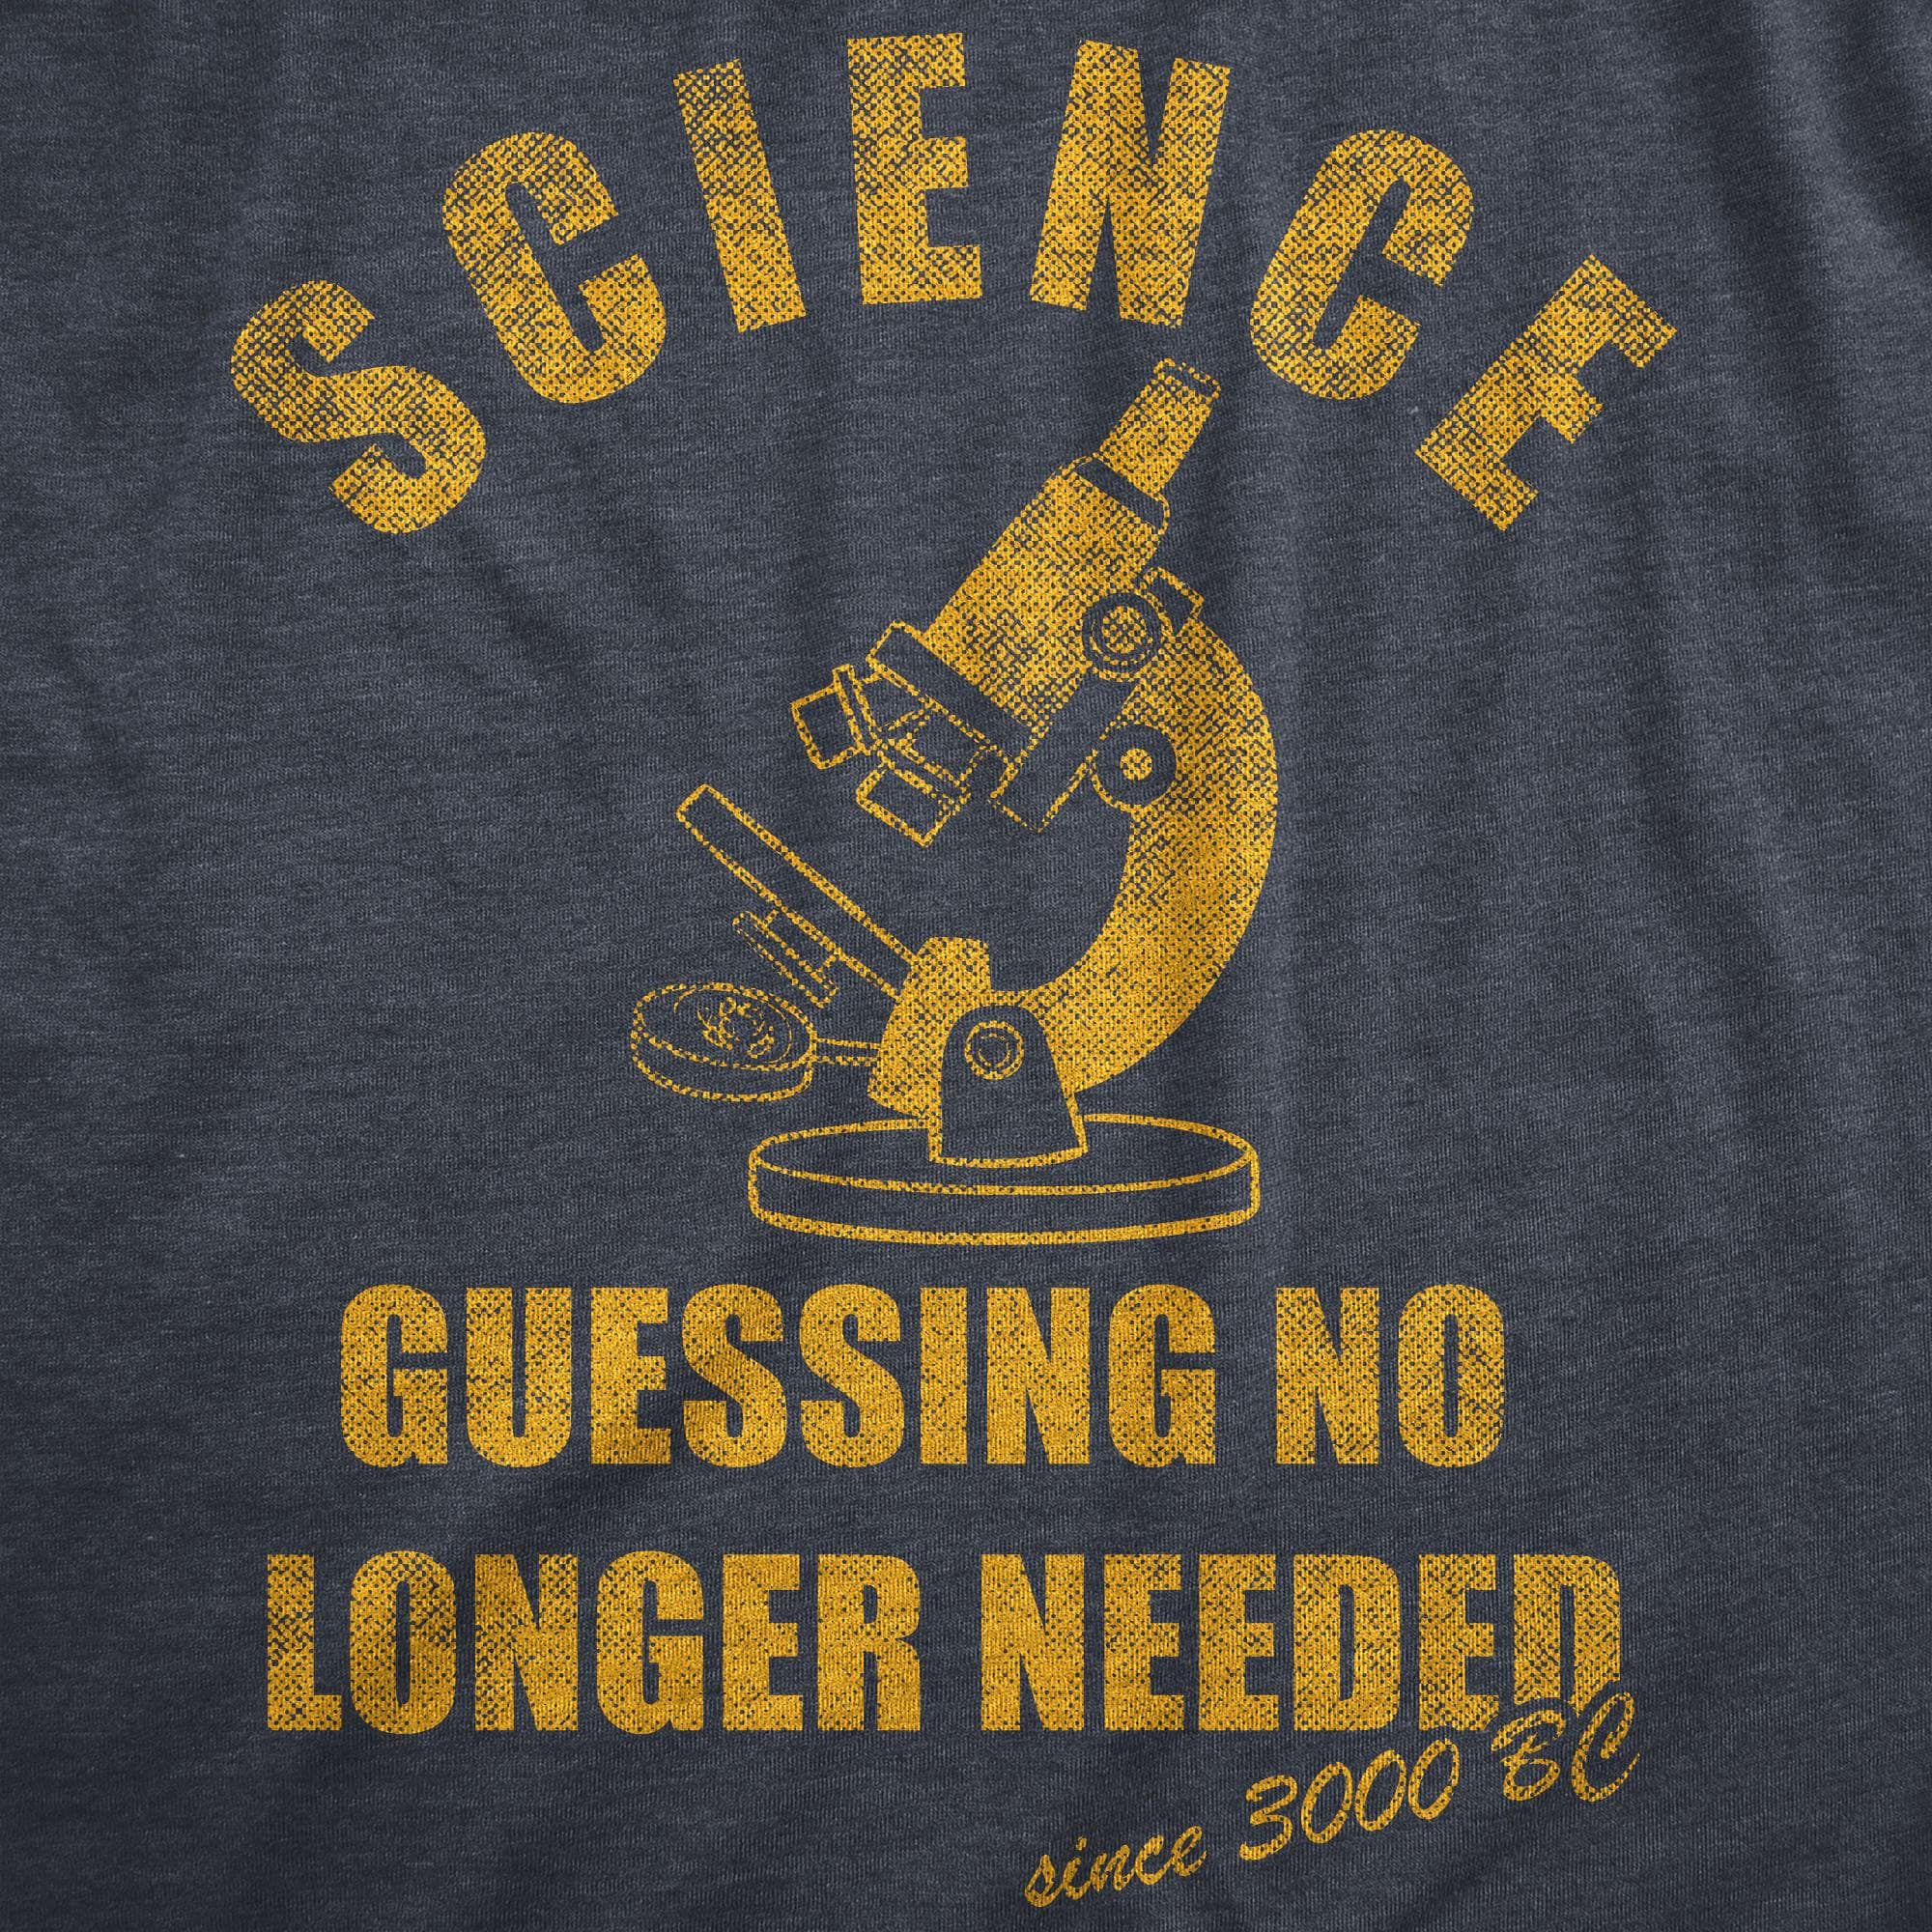 Science Guessing No Longer Needed Men's Tshirt  -  Crazy Dog T-Shirts